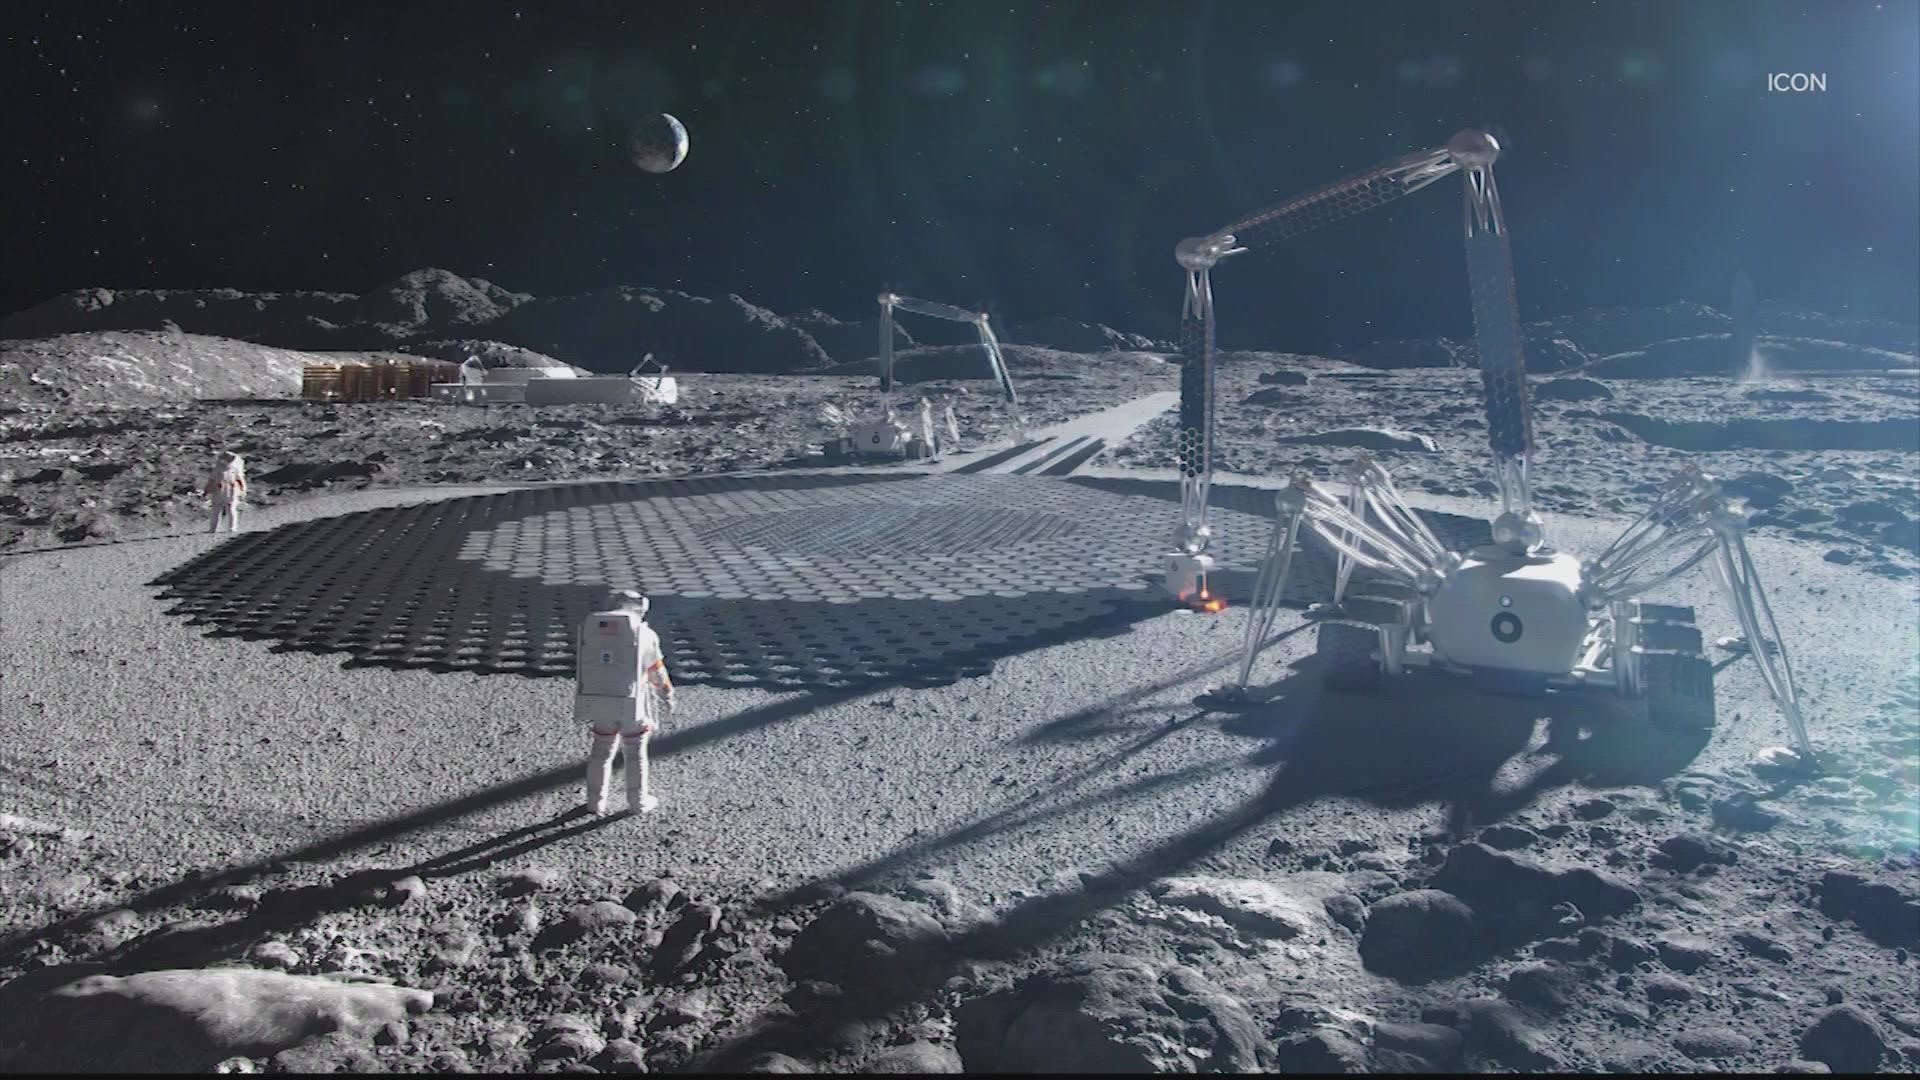 Through a $57 million contract with NASA, ICON, a company out of Austin, is working to put a broad spectrum of infrastructure on the moon.